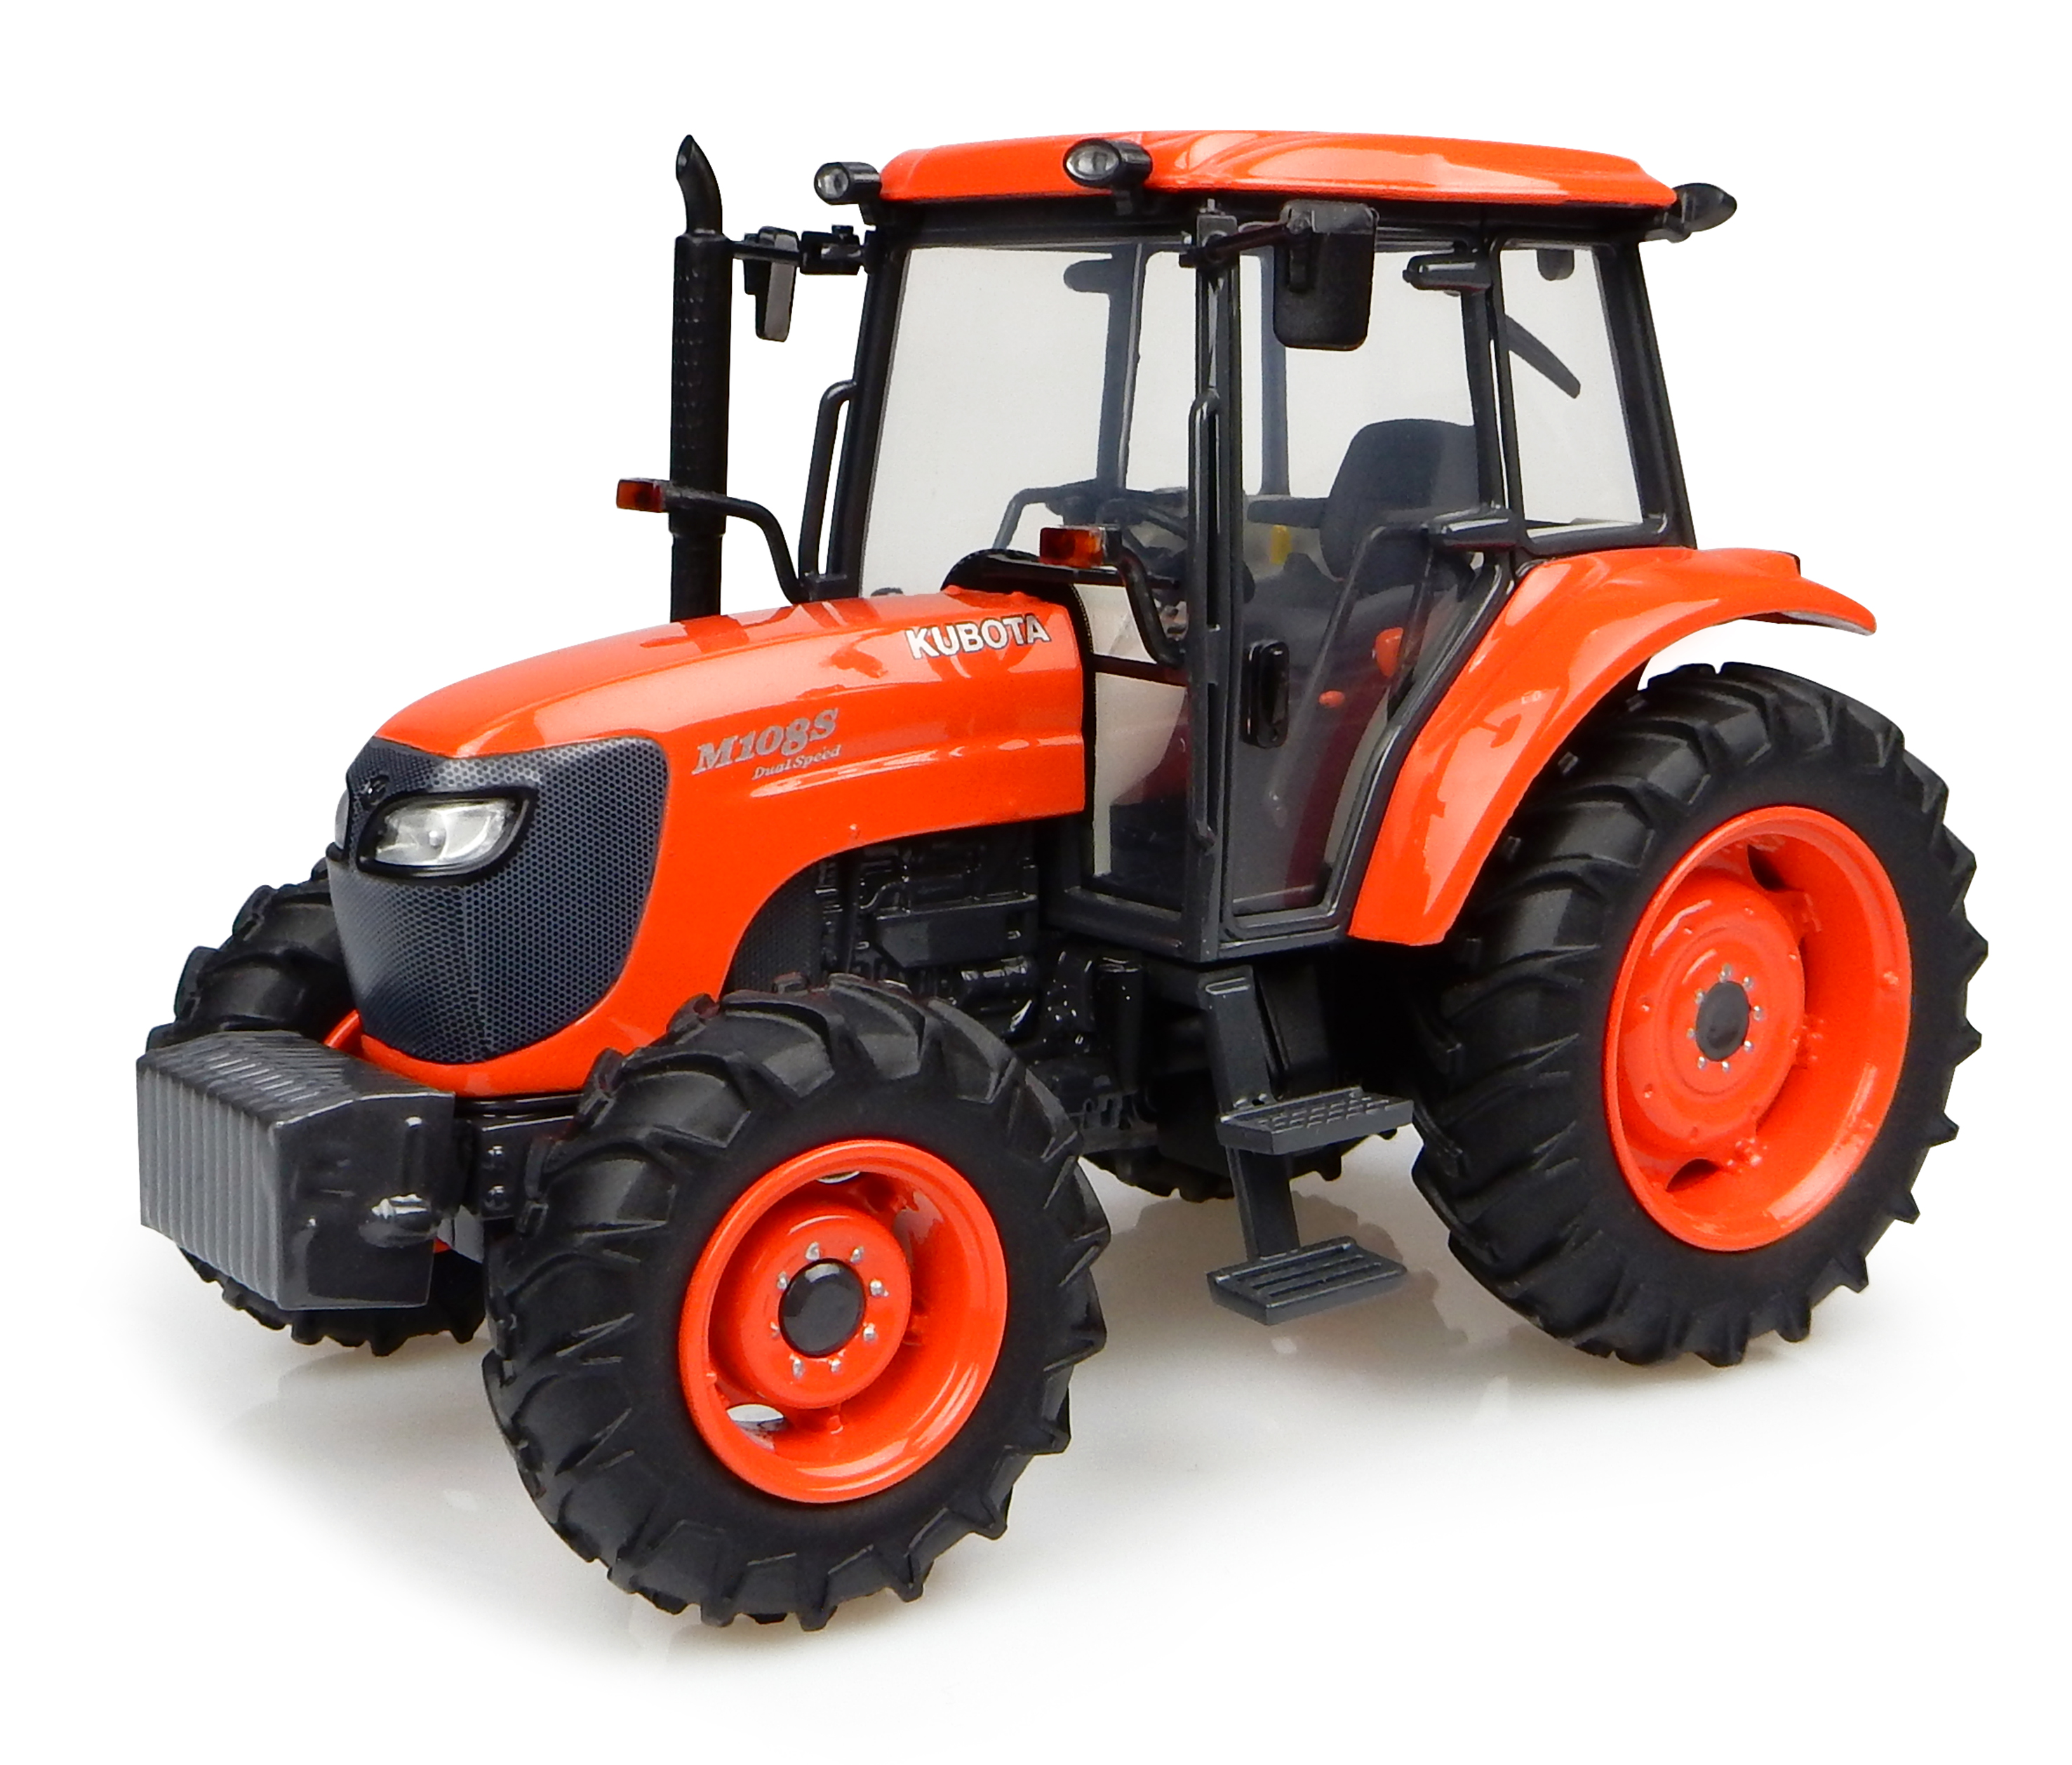 S tractor